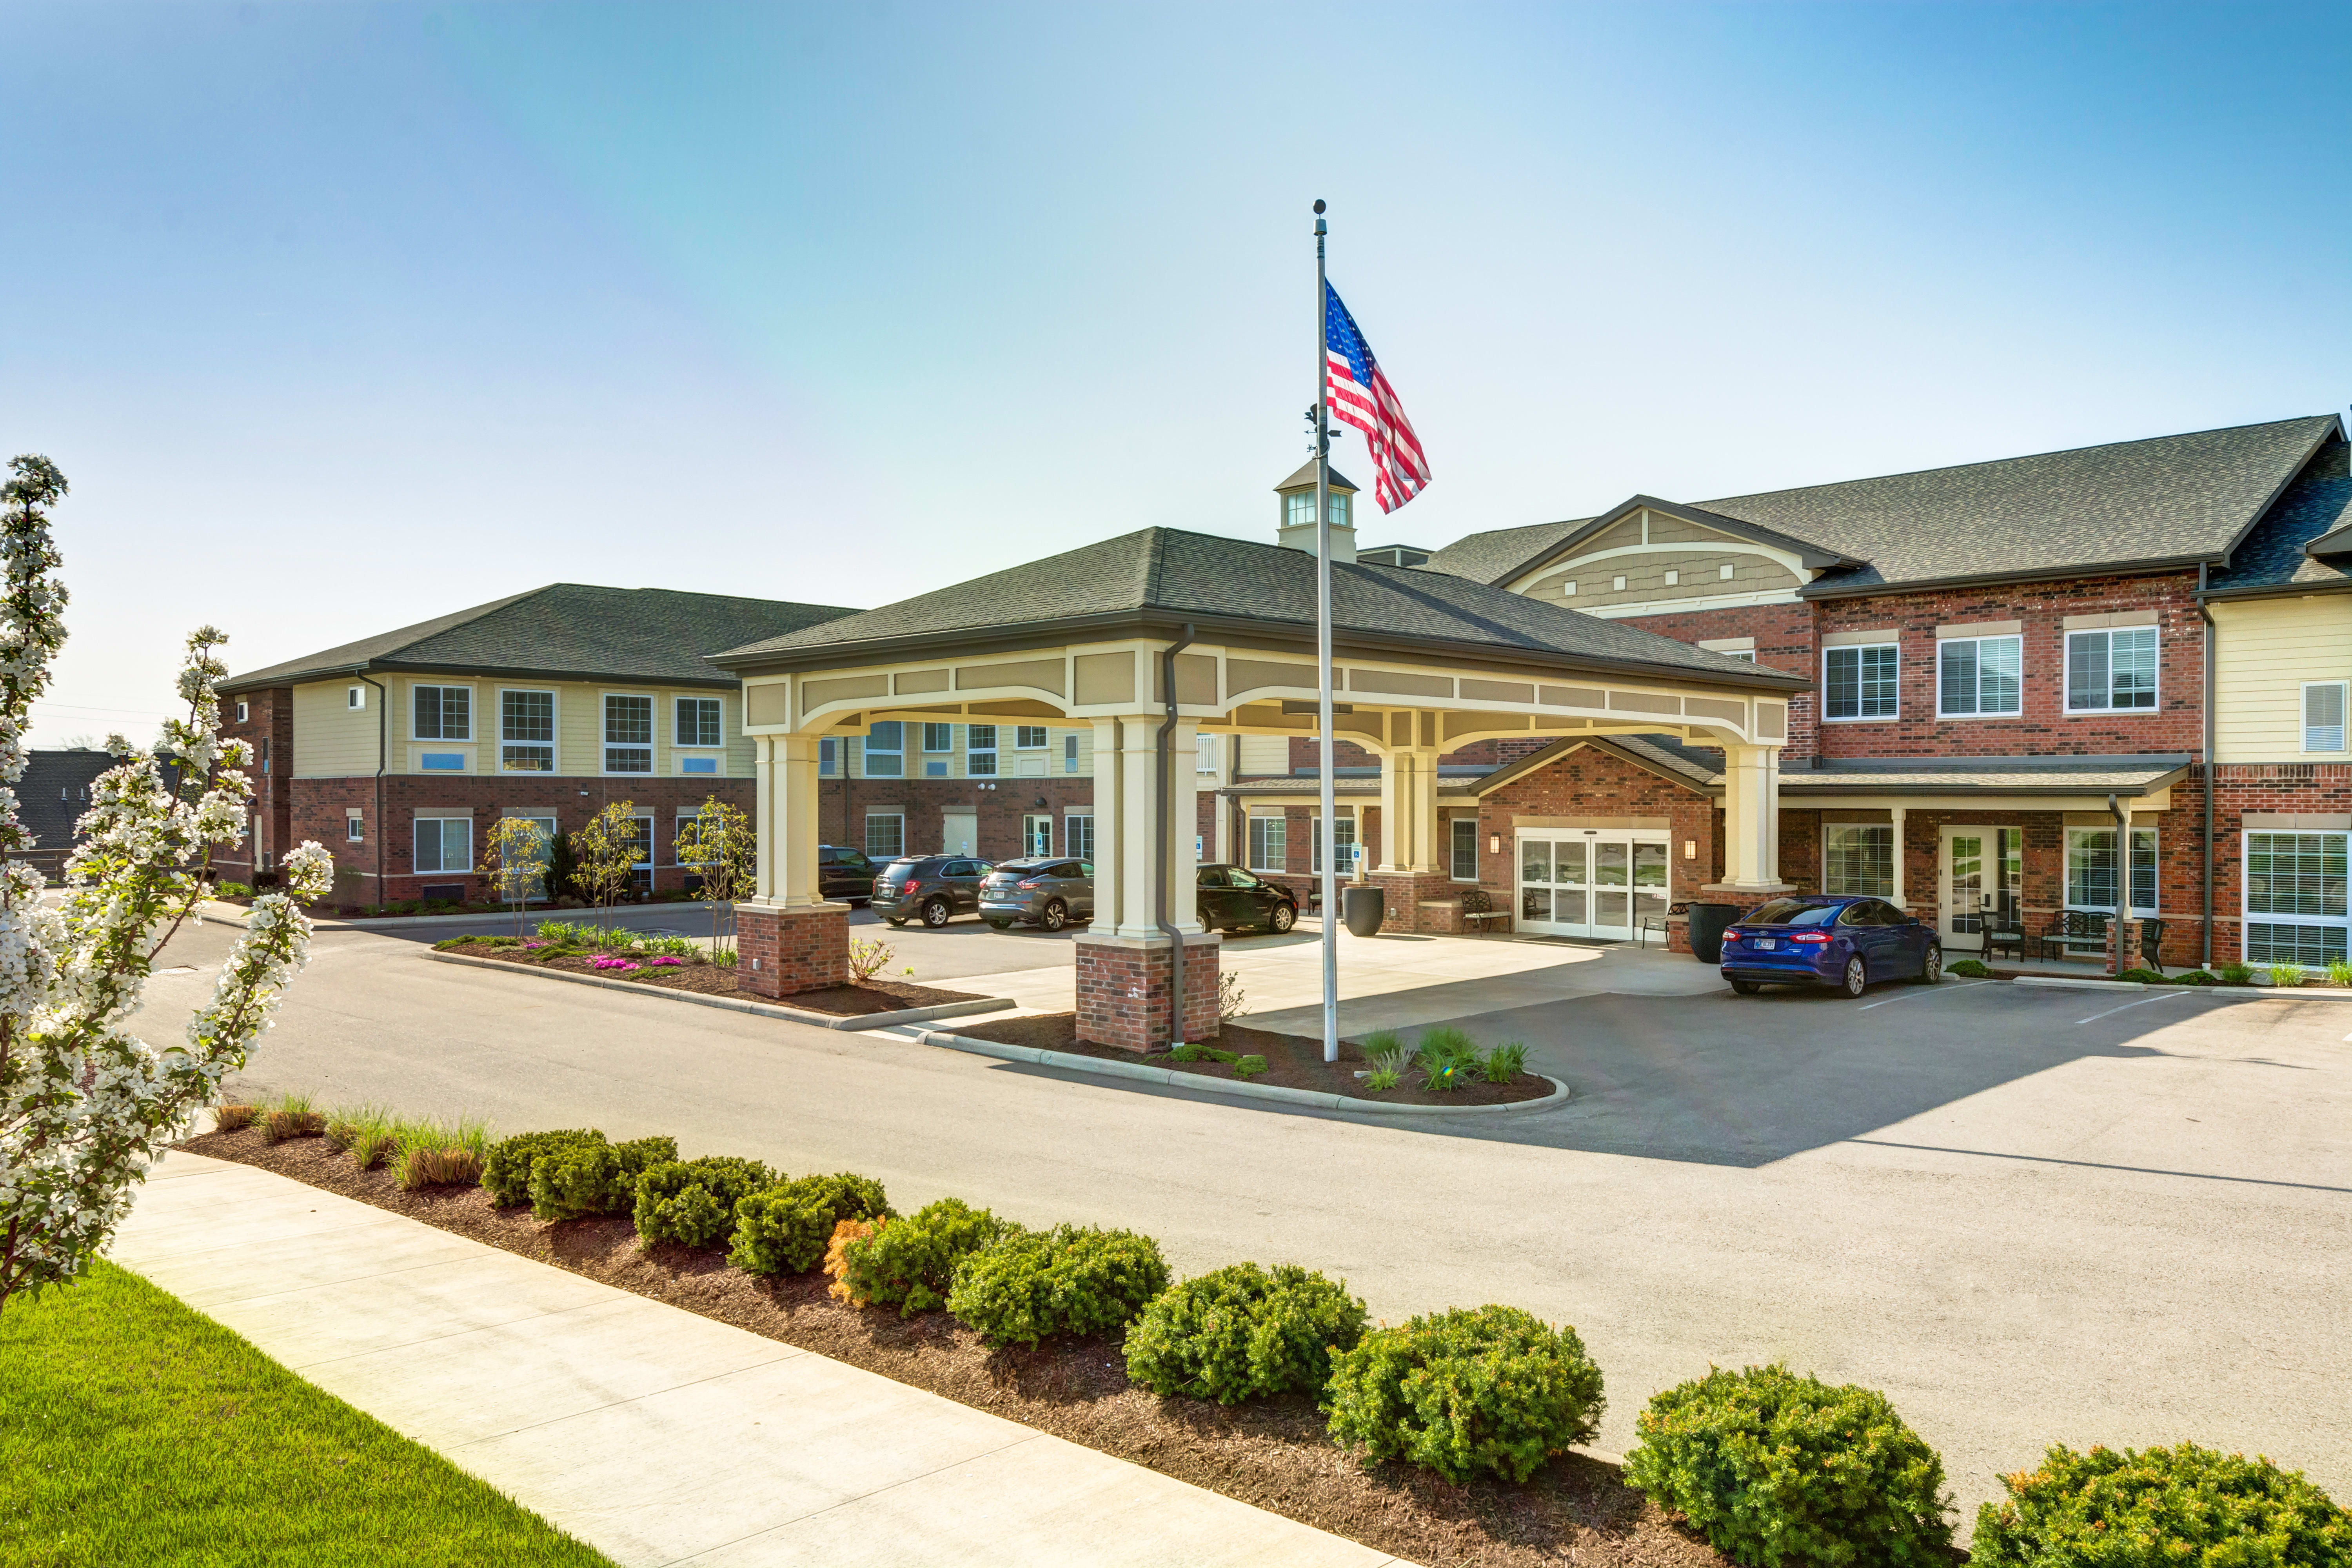 West Chester Assisted Living and Memory Care community exterior